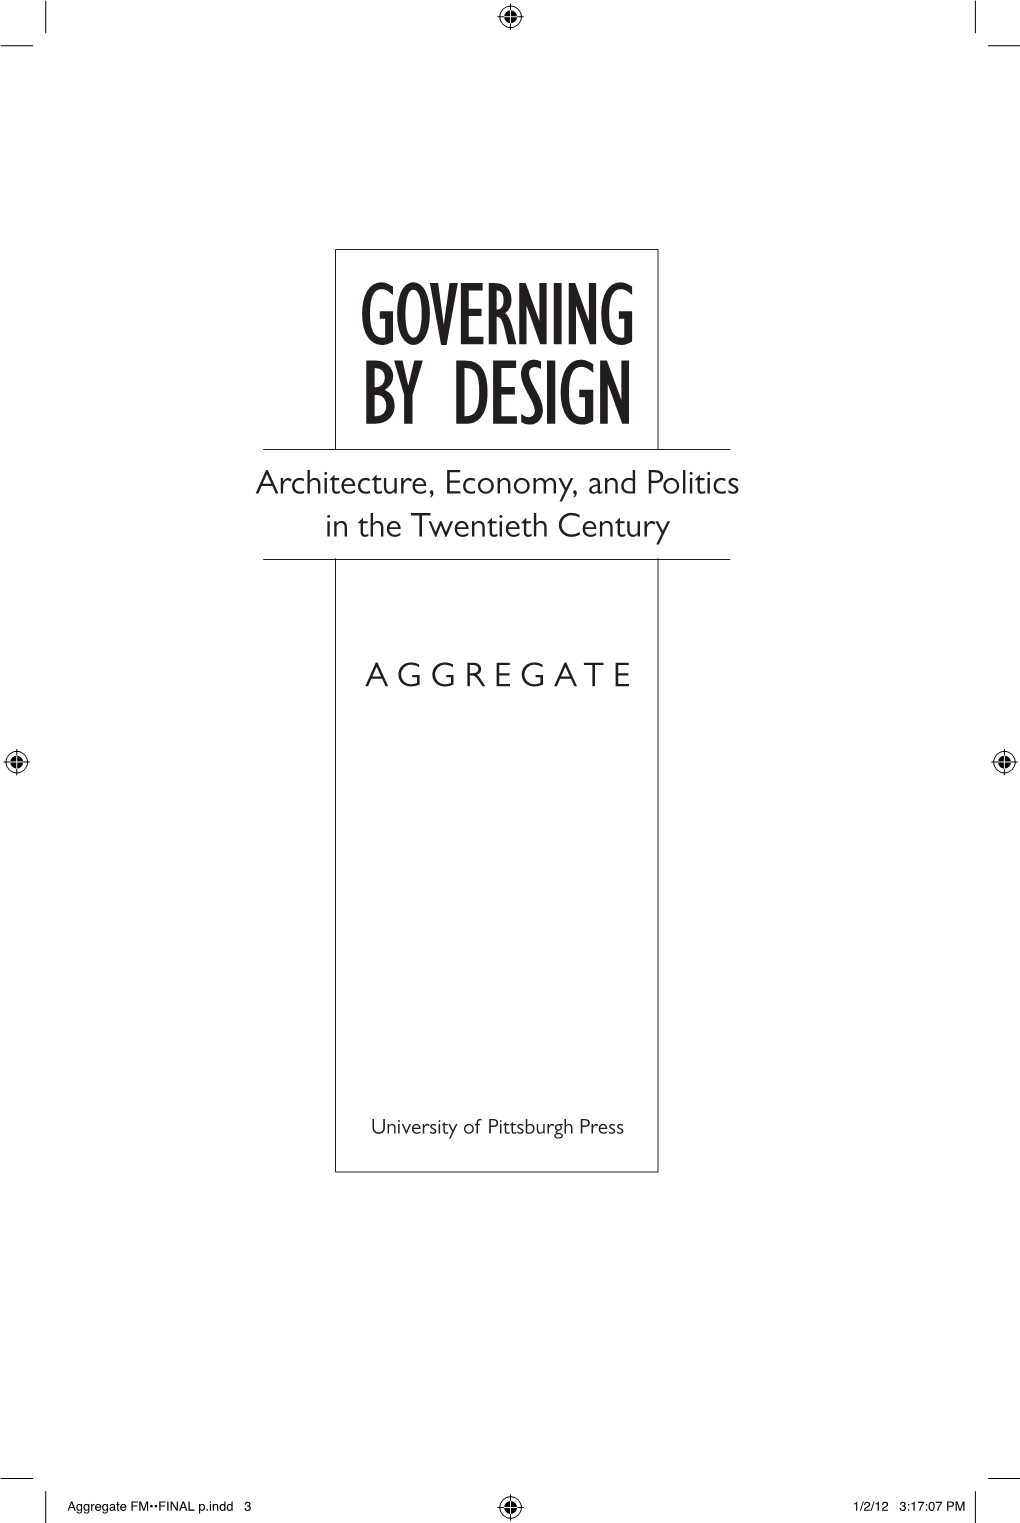 Governing by Design Architecture, Economy, and Politics in the Twentieth Century